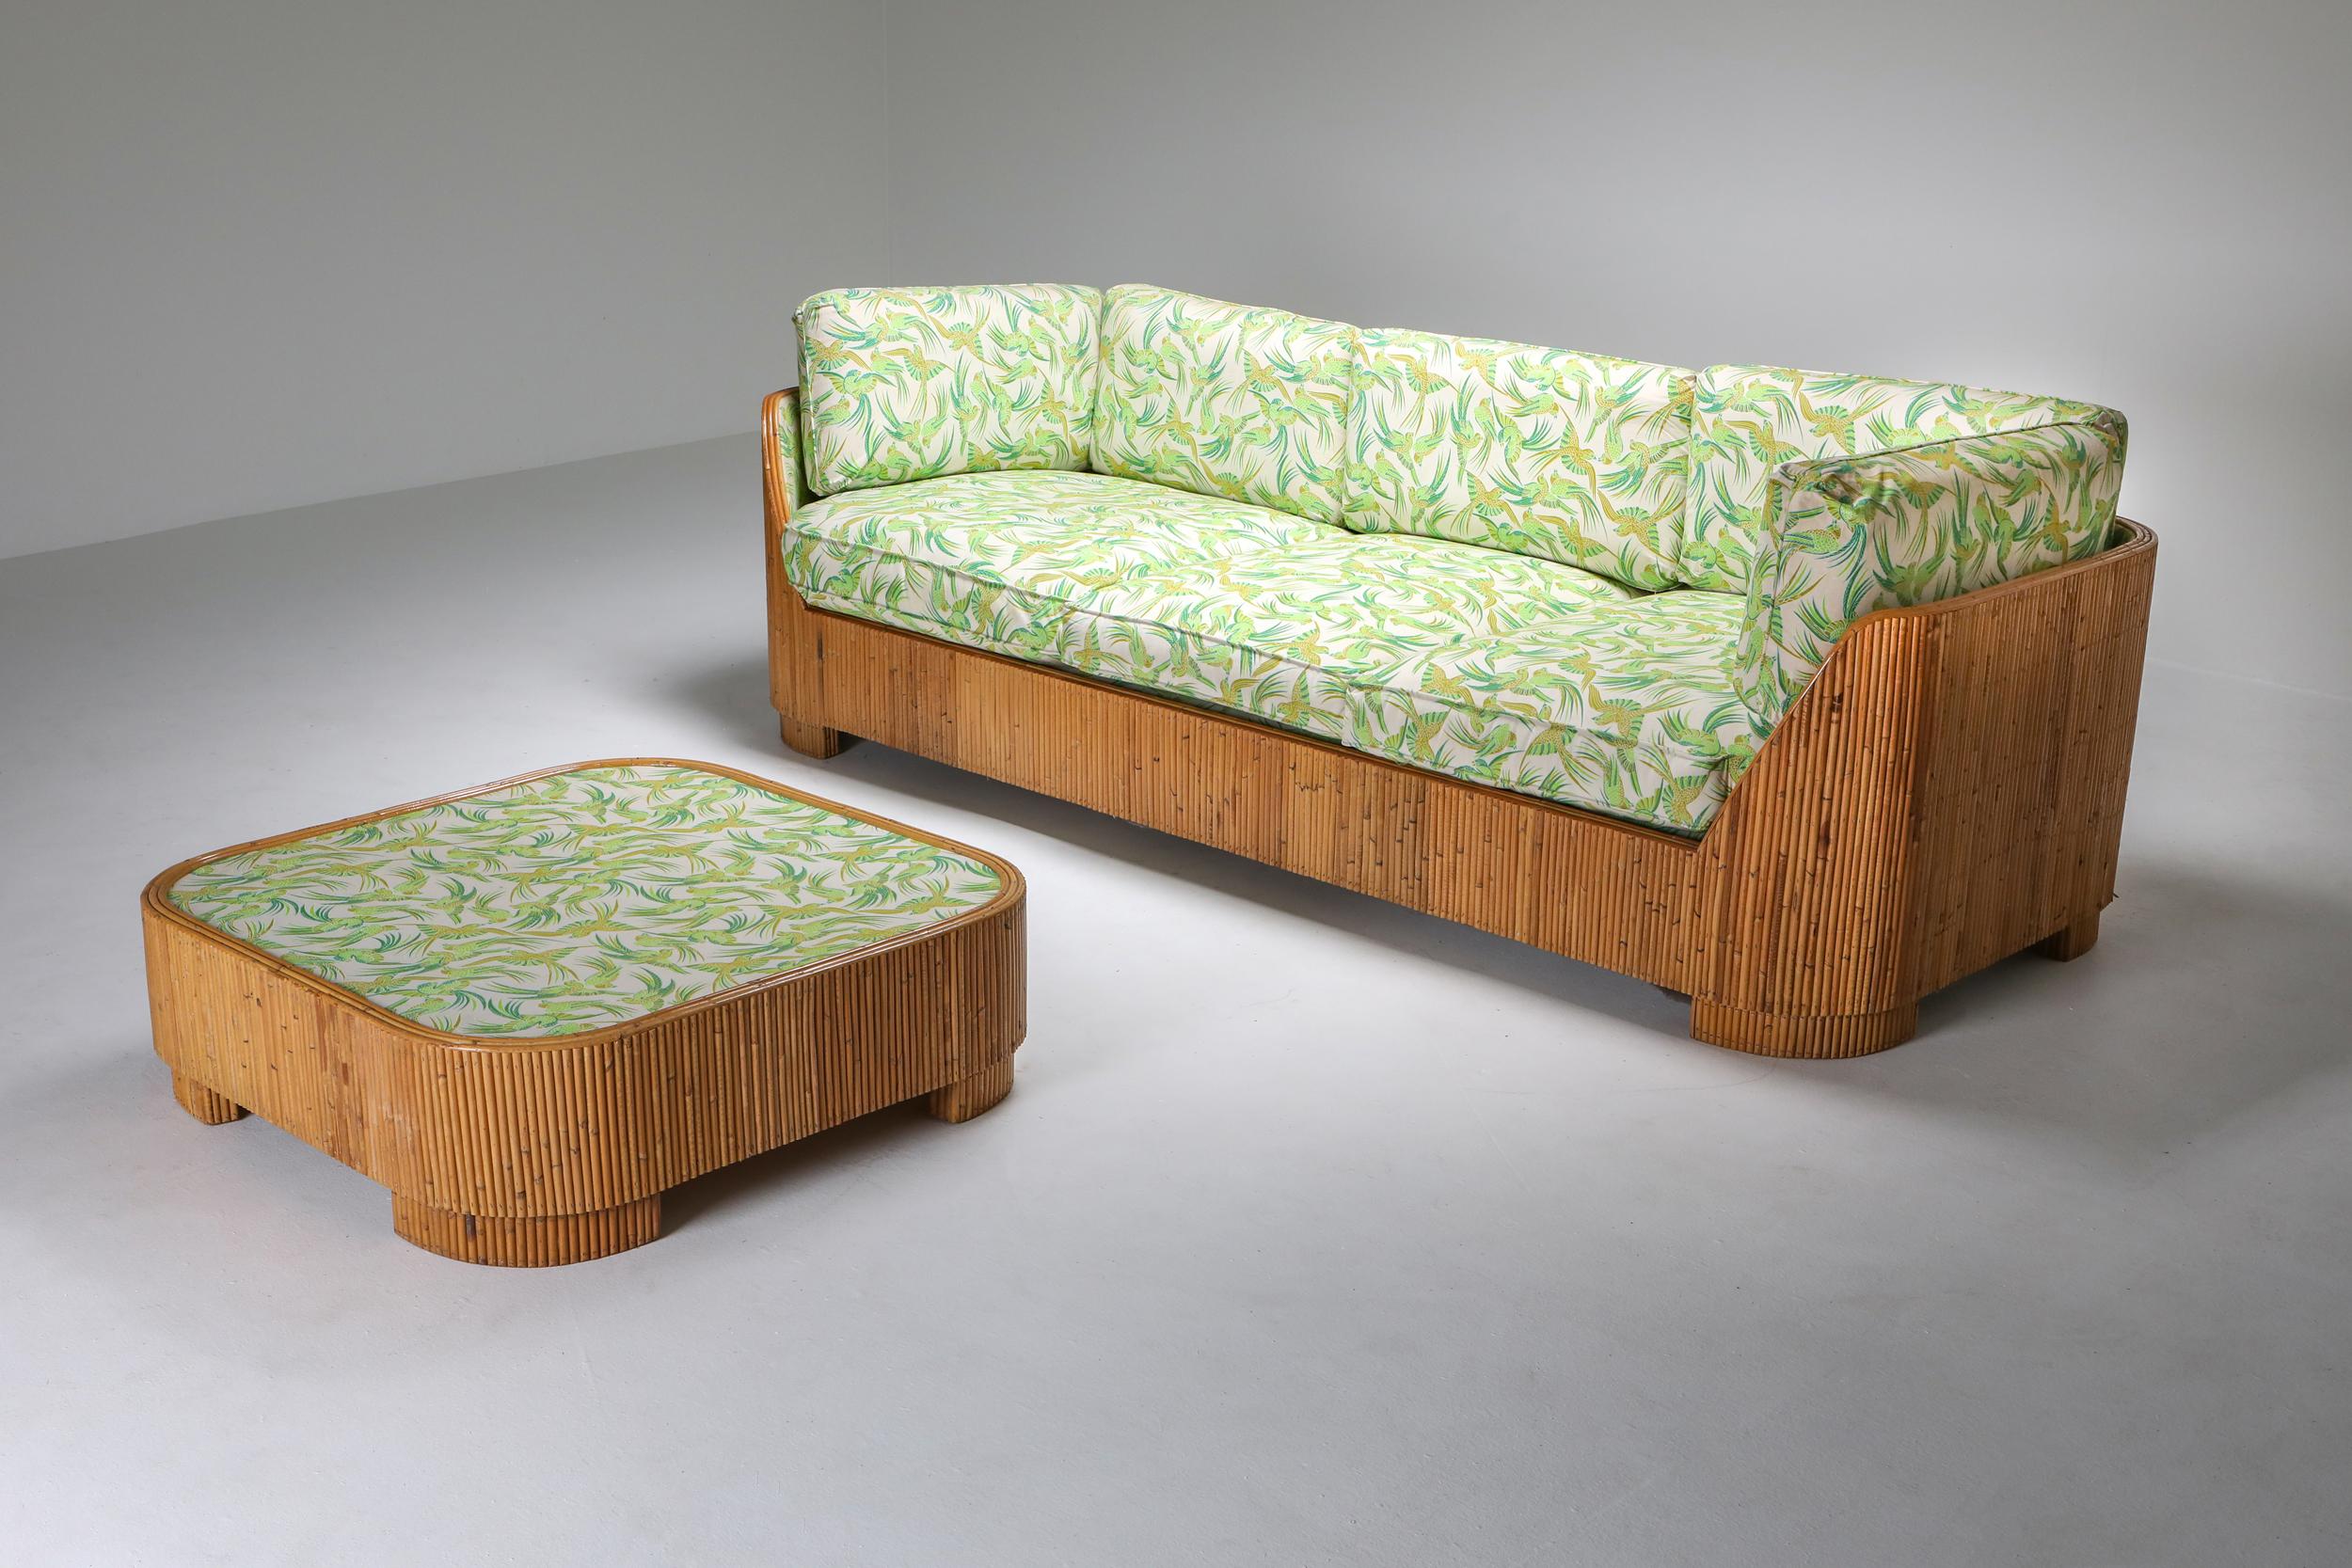 Vivai del Sud bamboo couch, 1970s, Italy.

Well-matched contrast between the raw bamboo base and soft floral fabric.
Would fit perfectly in a Hollywood Regency style interior.

Measurements: W 230, D 95, H 79, SH 43.

 